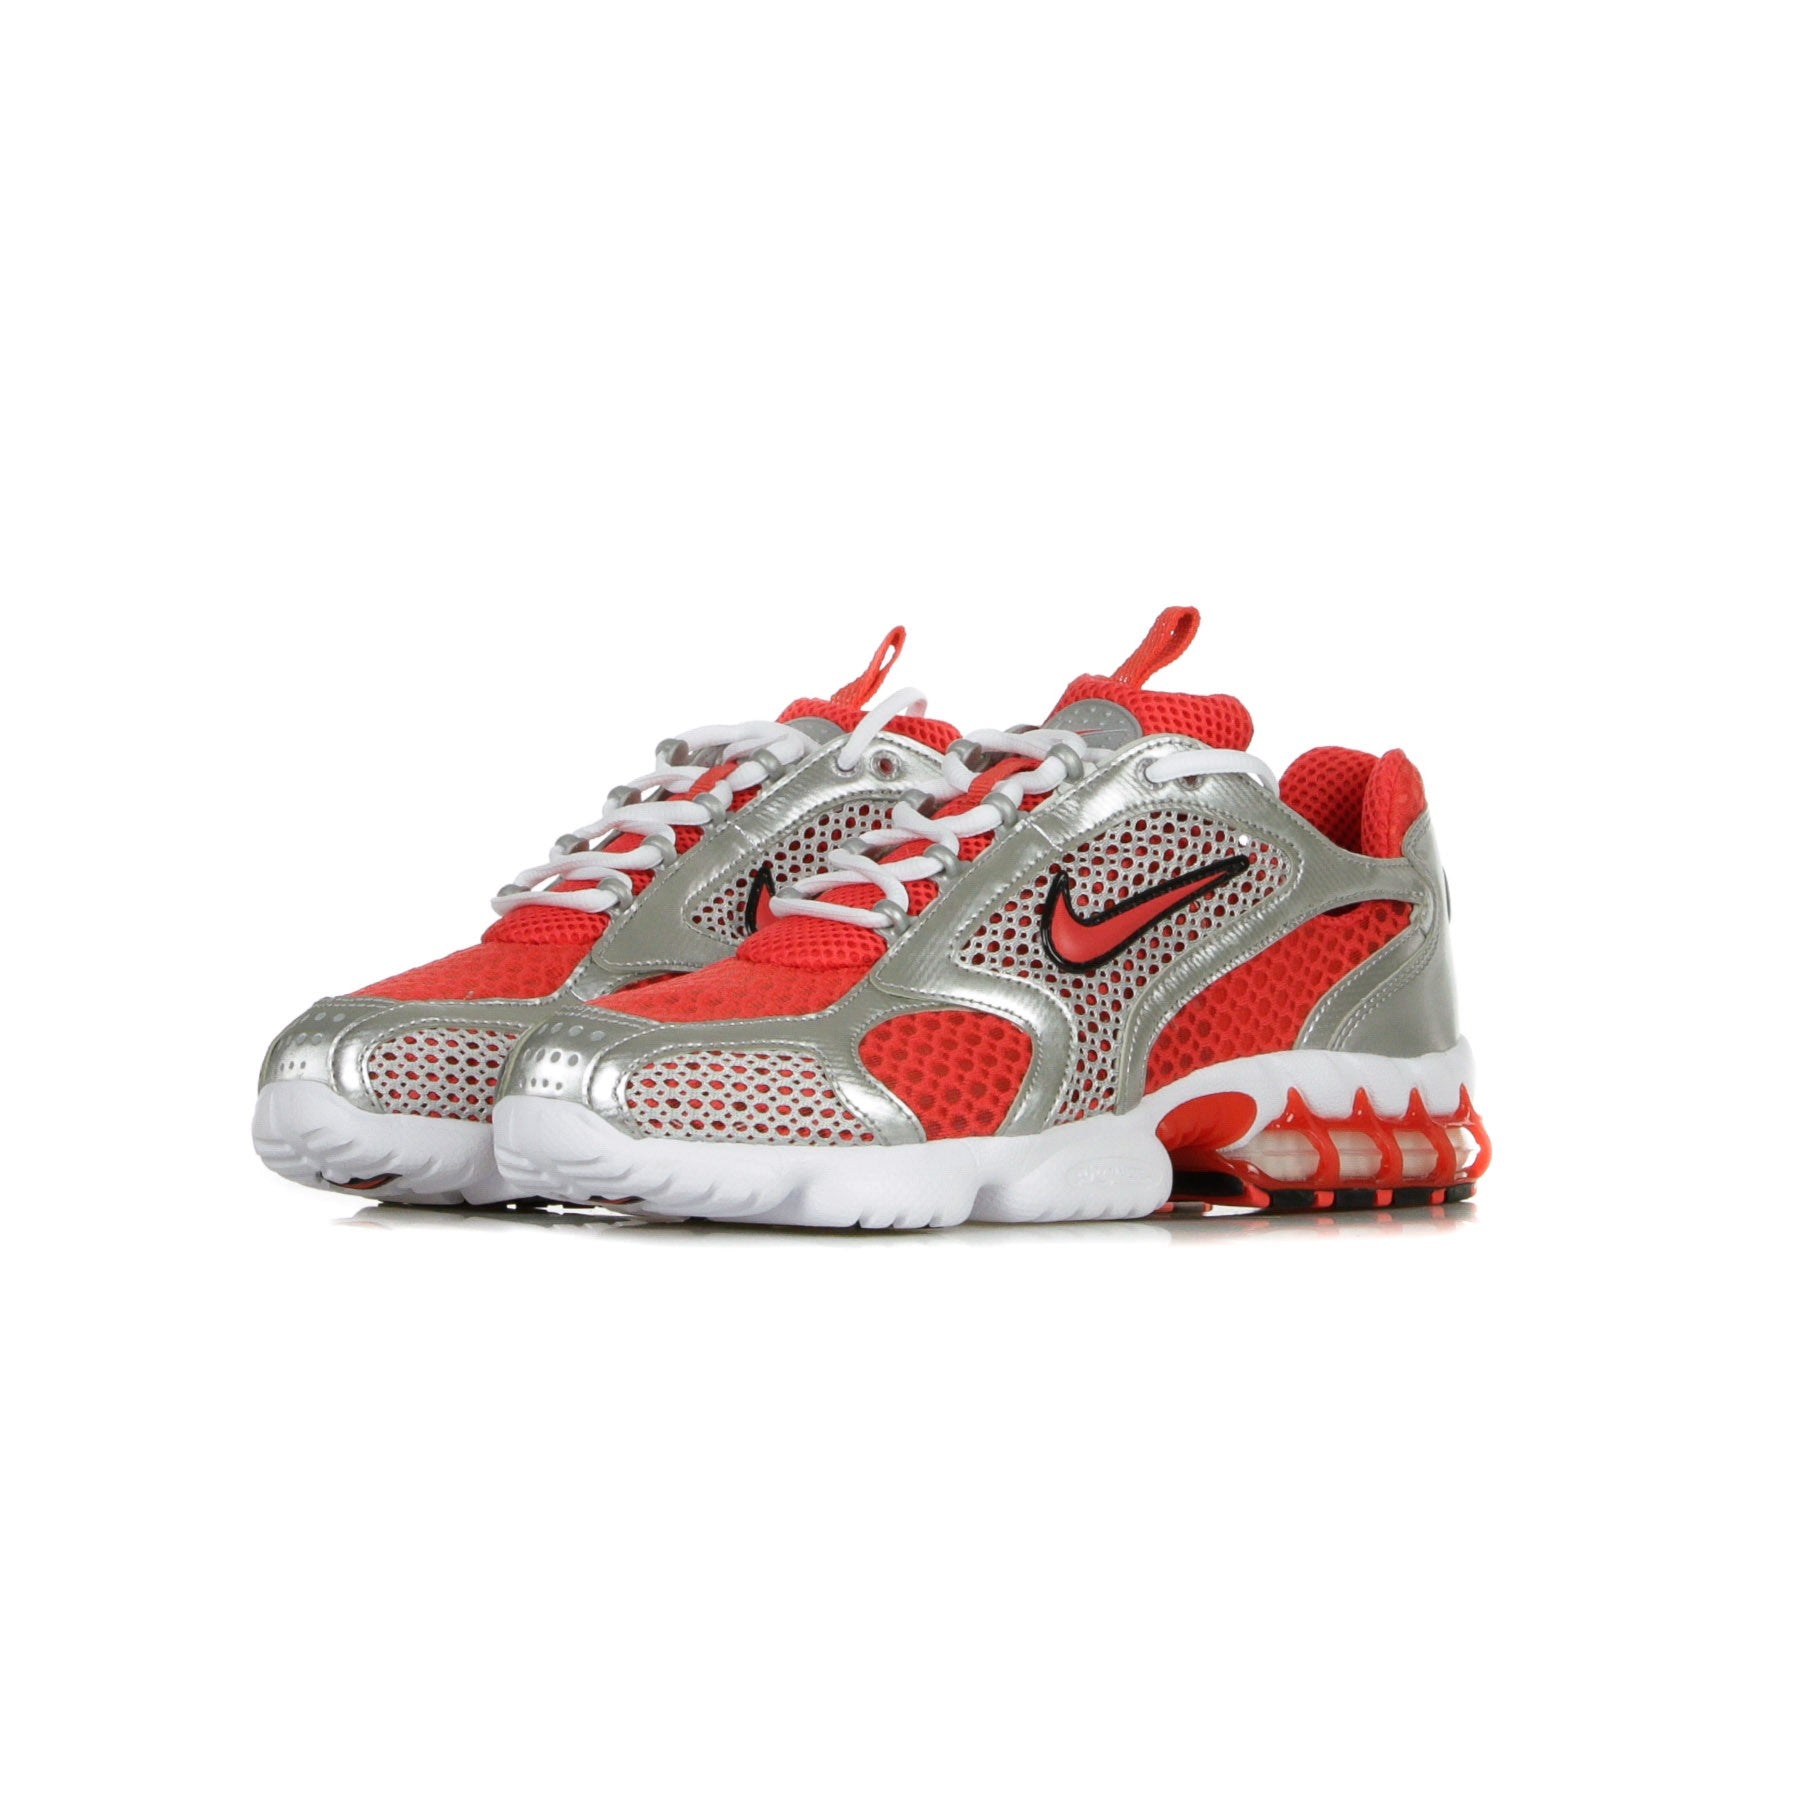 Air Zoom Spiridon Cage 2 Track Red/track Red/white Men's Low Shoe